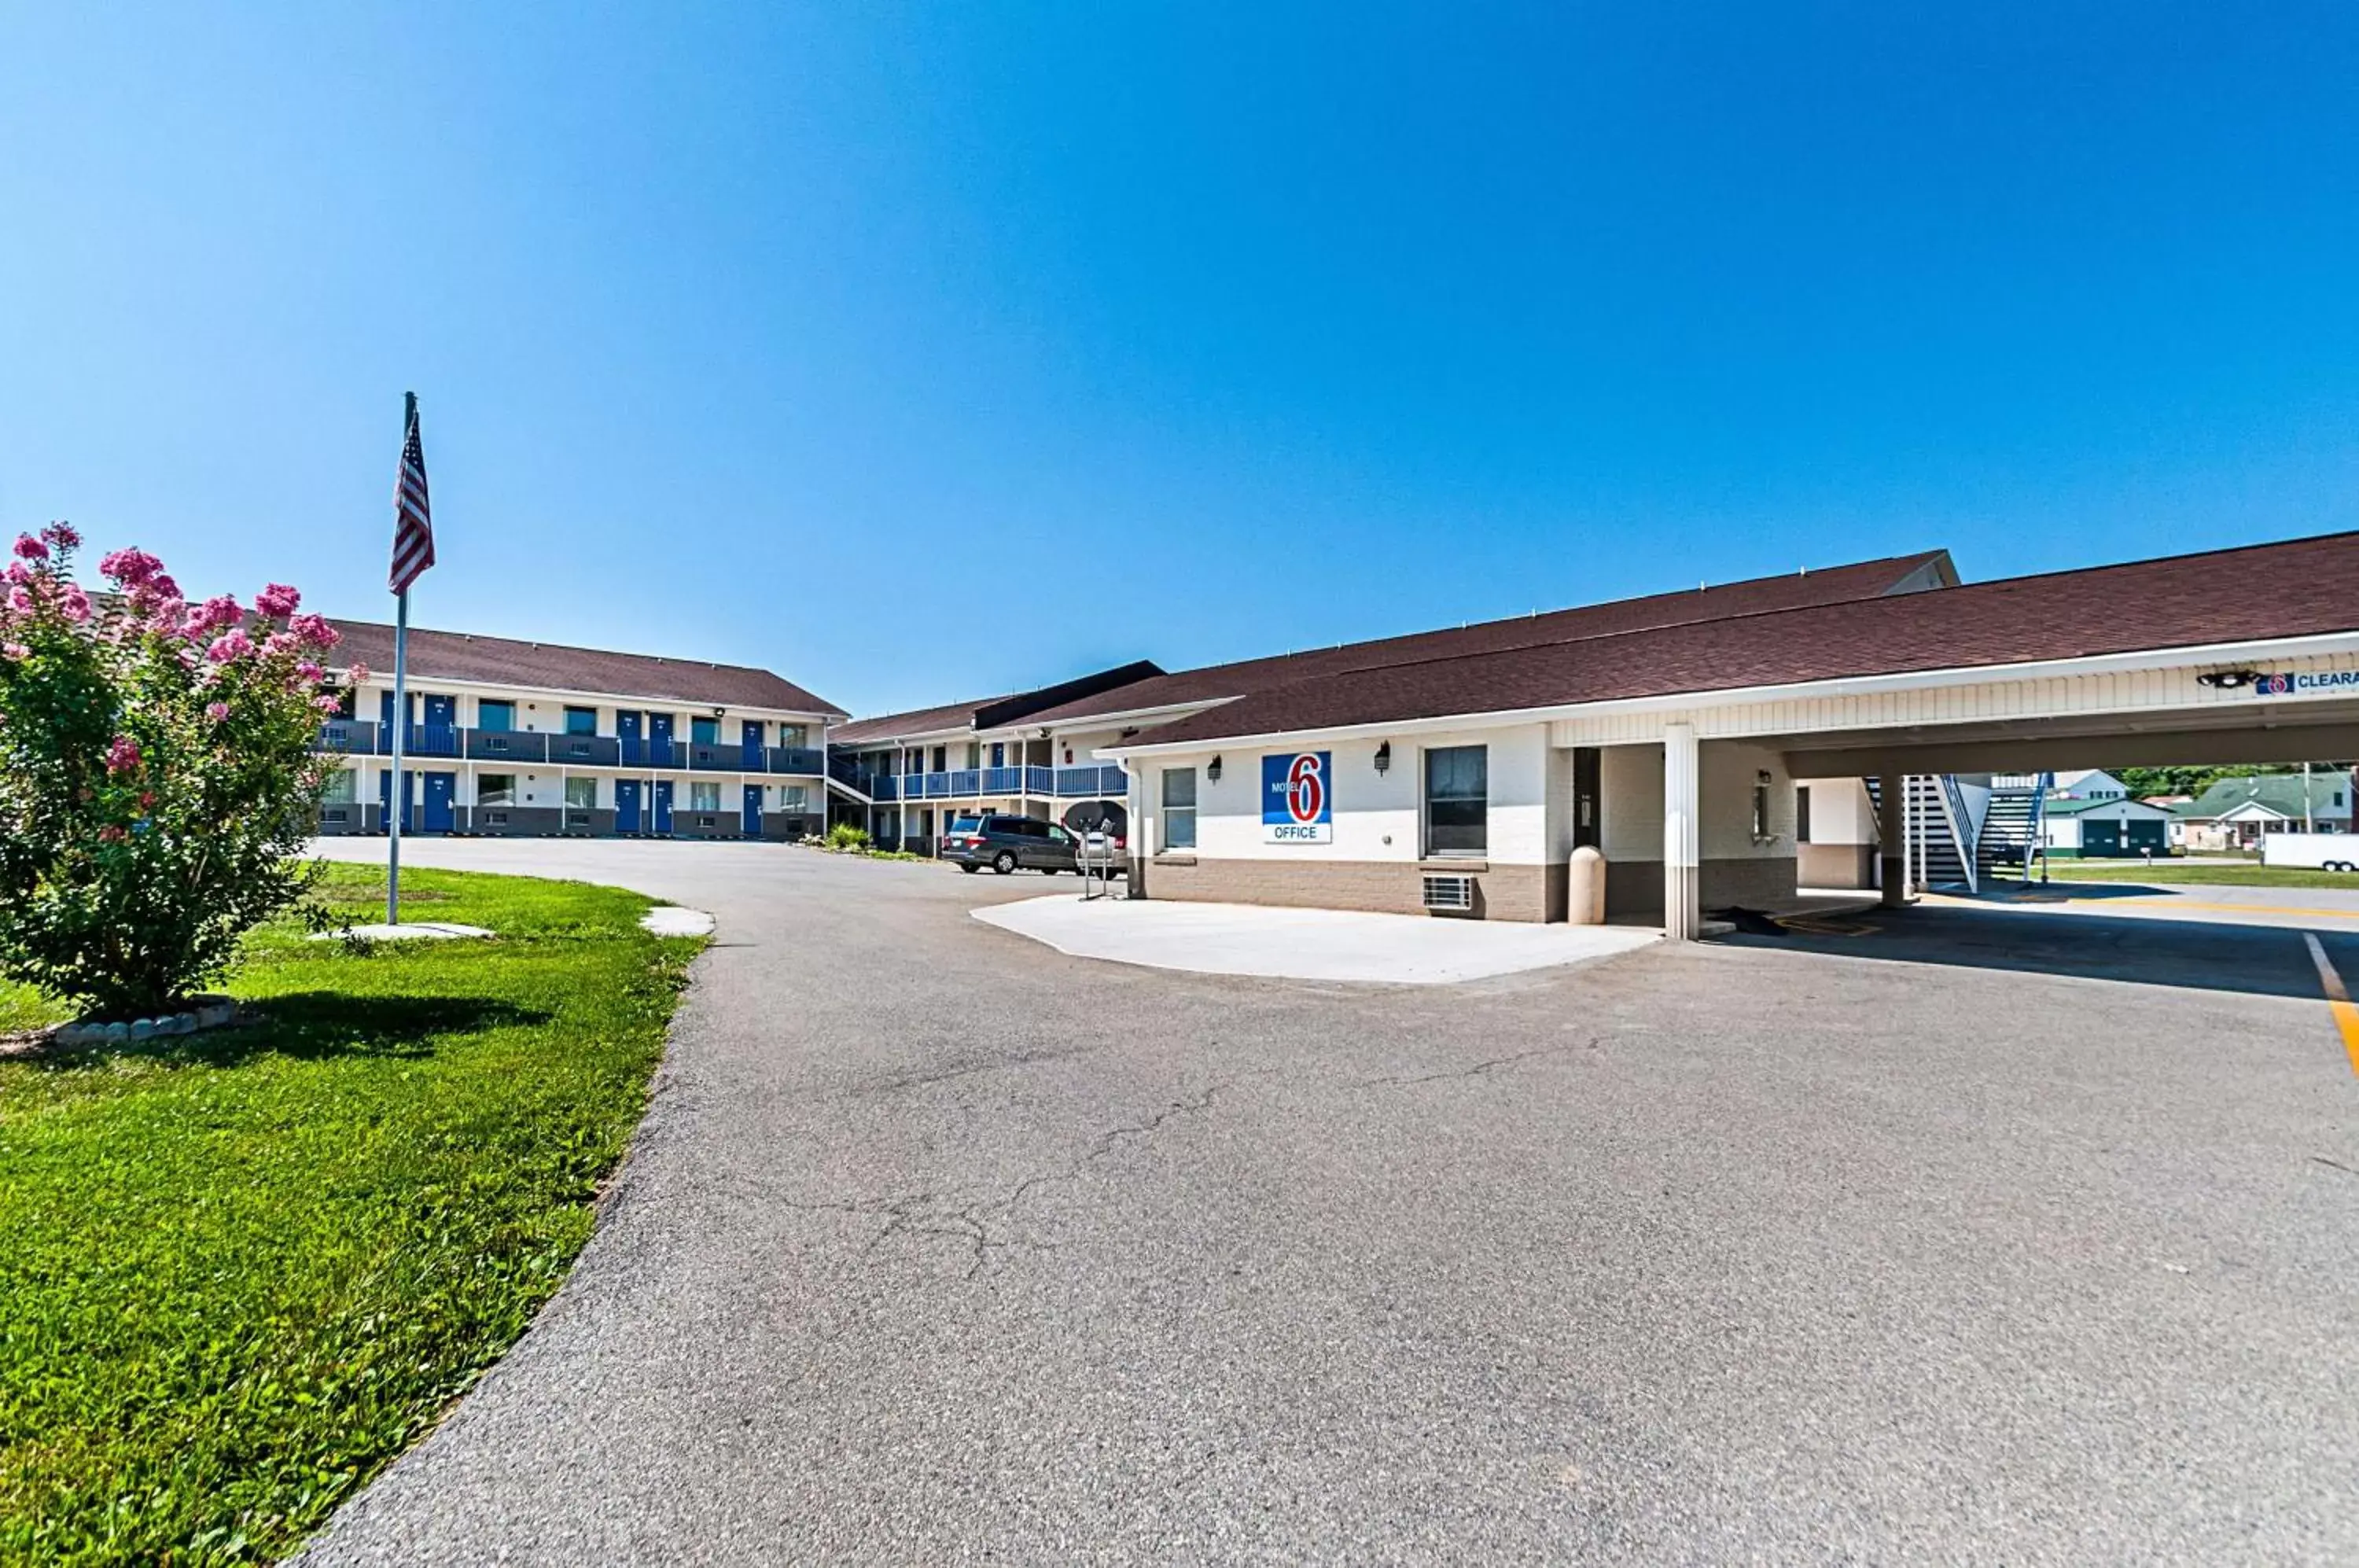 Property building, Patio/Outdoor Area in Motel 6-Charles Town, WV